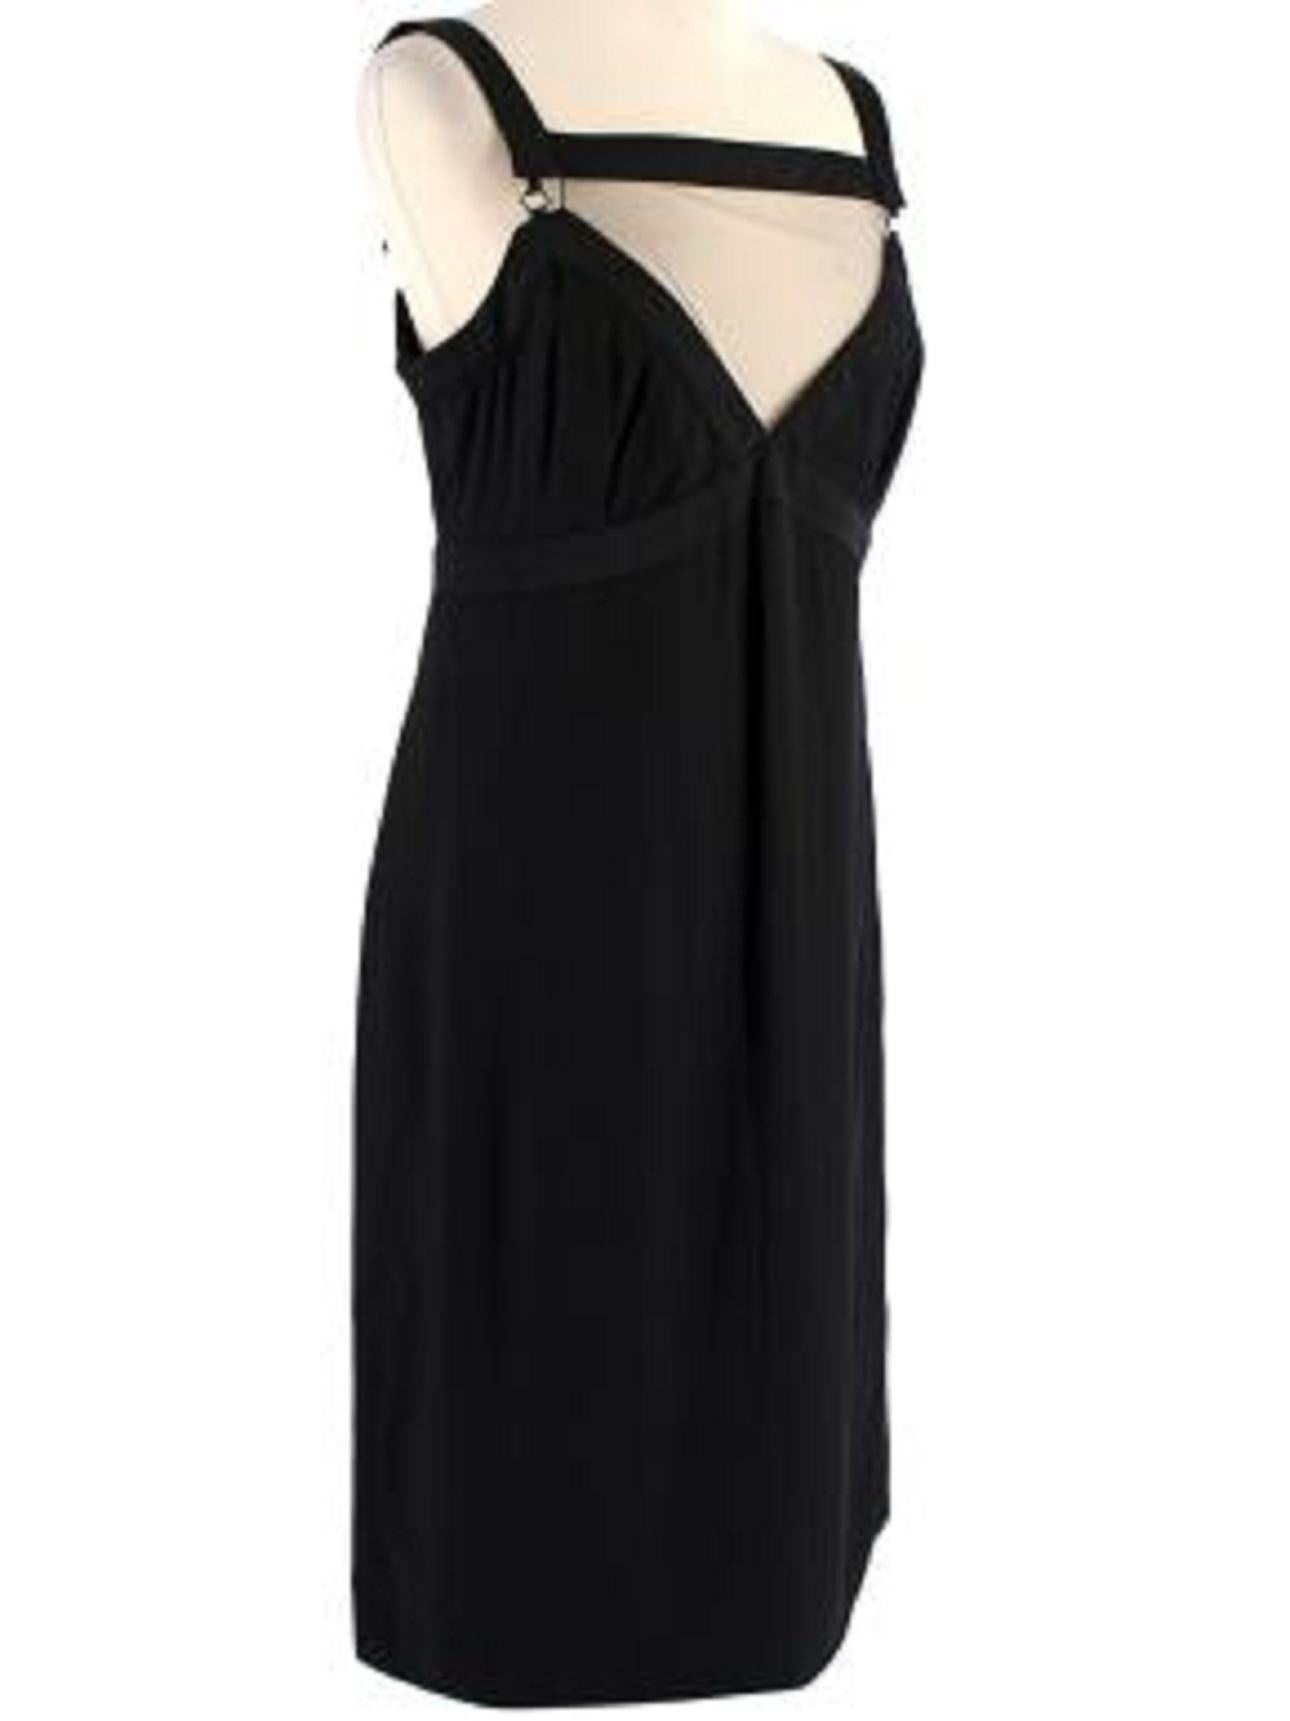 Givenchy Mesh Panelled Little Black Dress

-Square neckline 
-Mesh panel at the neckline 
-Silk panels 
-Concealed zip fastening along the side 
-Fully lined 

Material: 

58% Viscose 
42% Acetate 

Made in Italy 

9.5/10 excellent conditions,